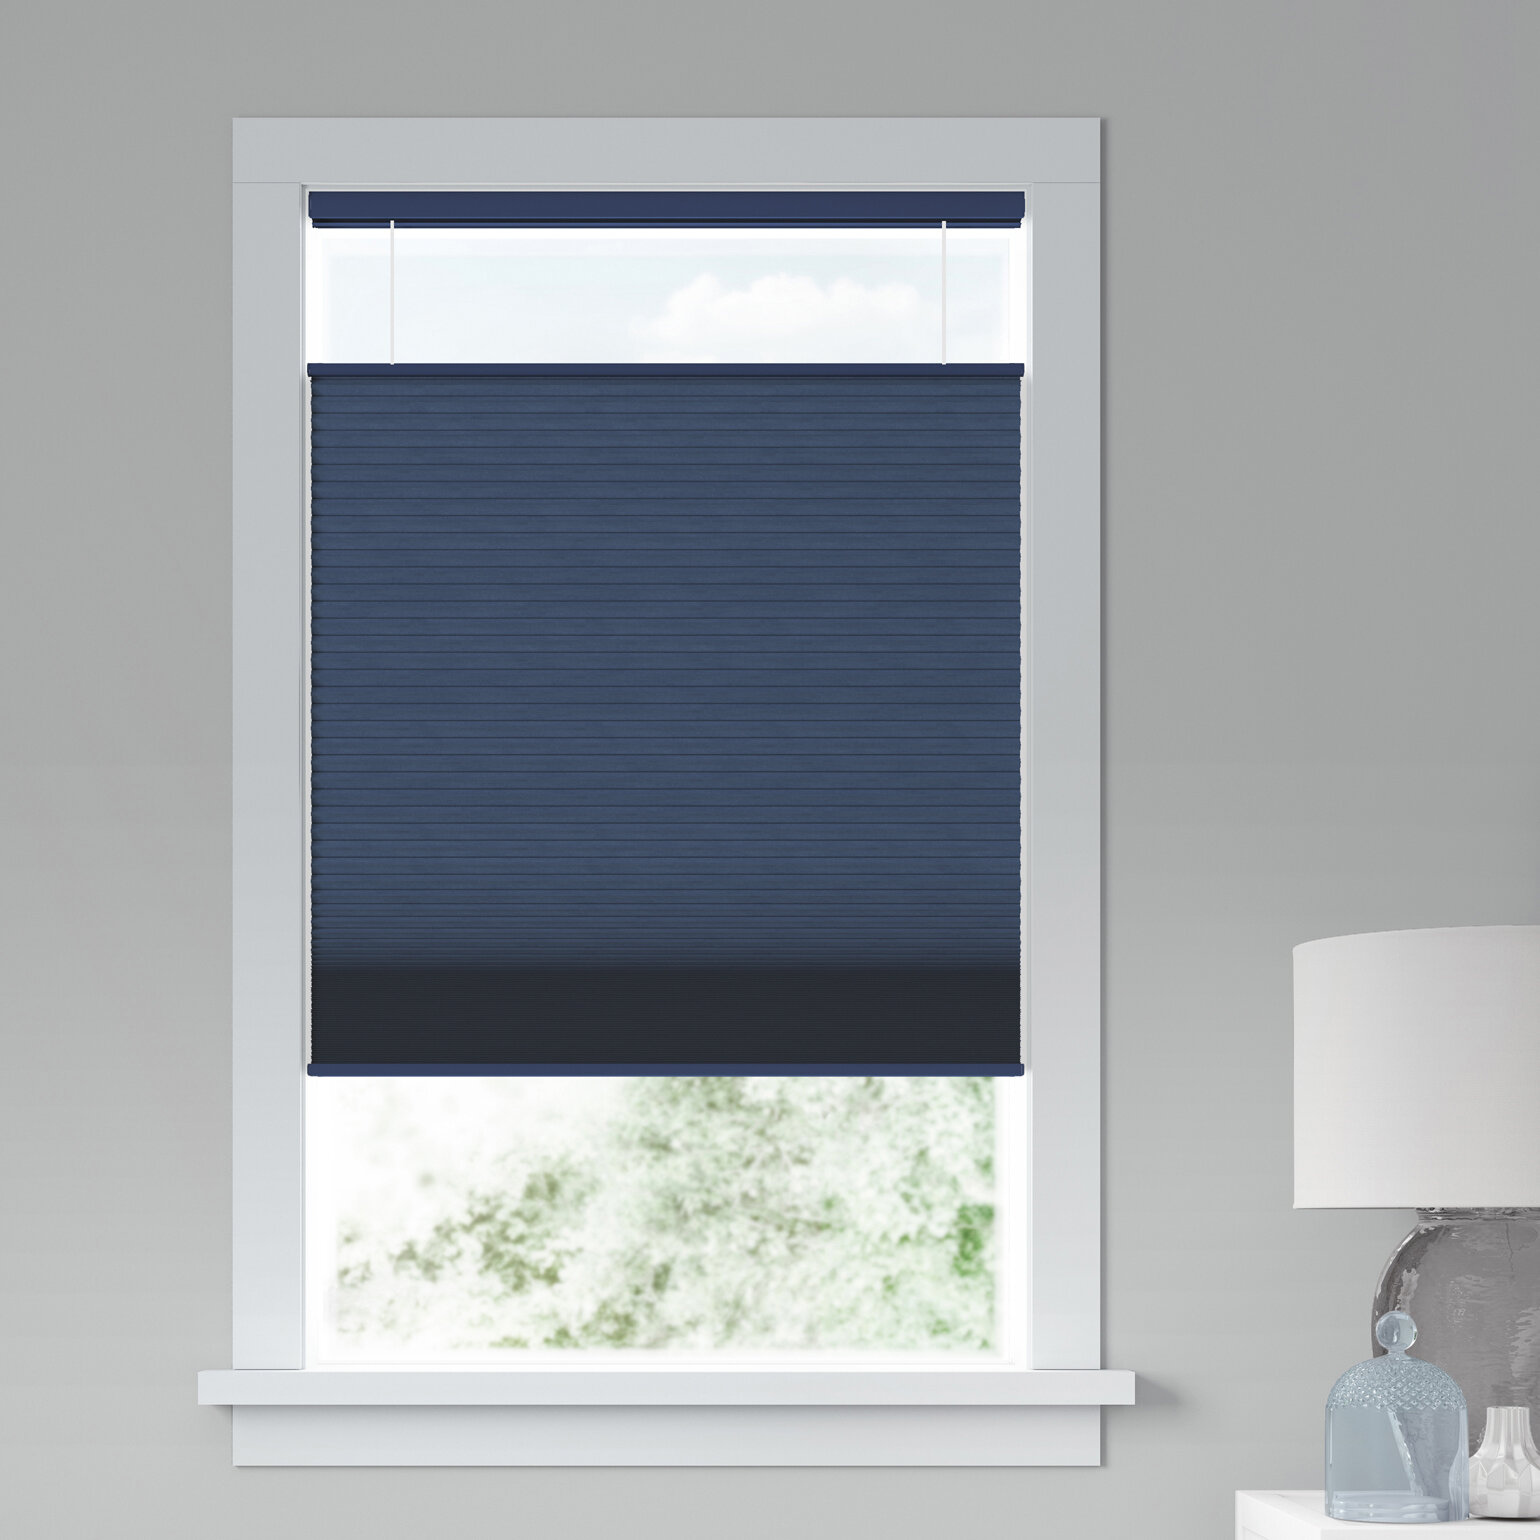 Where are Levolor Blinds Made? Understanding the Origins of Your Window Dressings